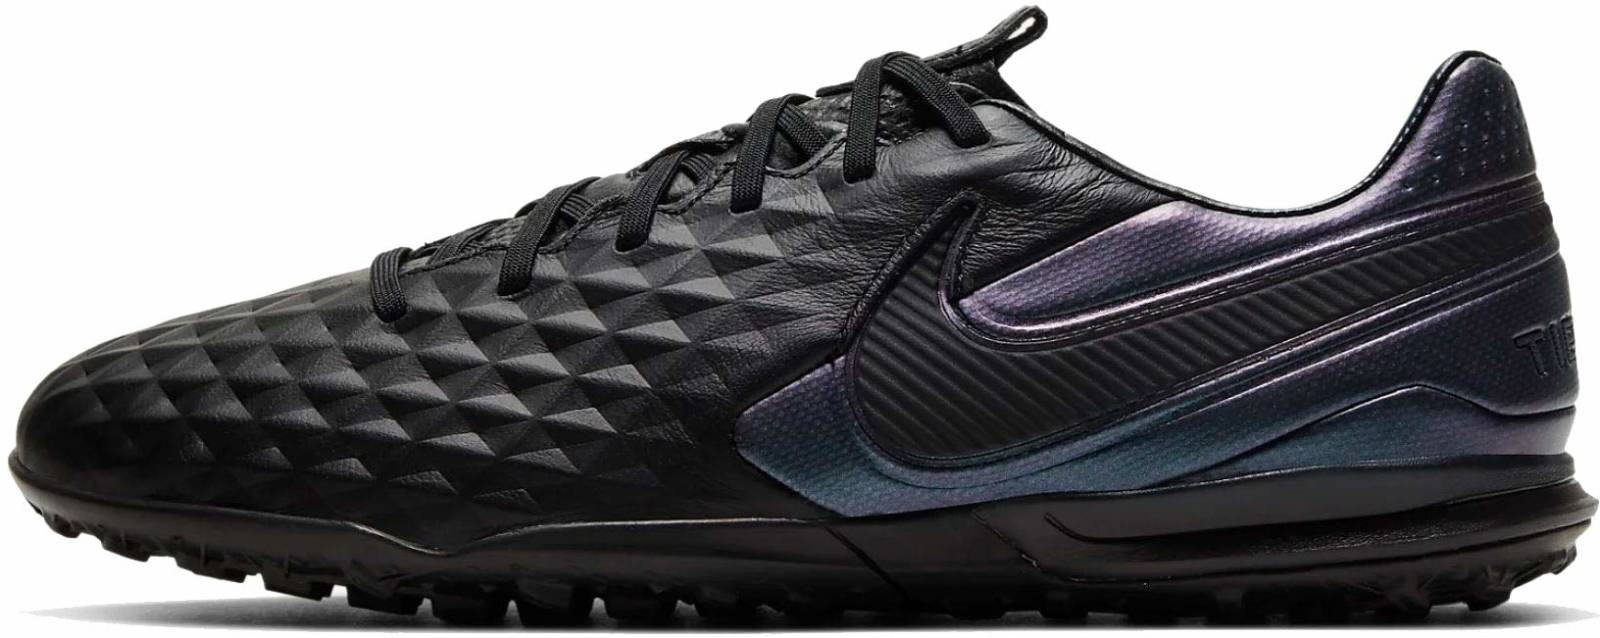 Save 42% on Nike Turf Soccer Cleats (29 